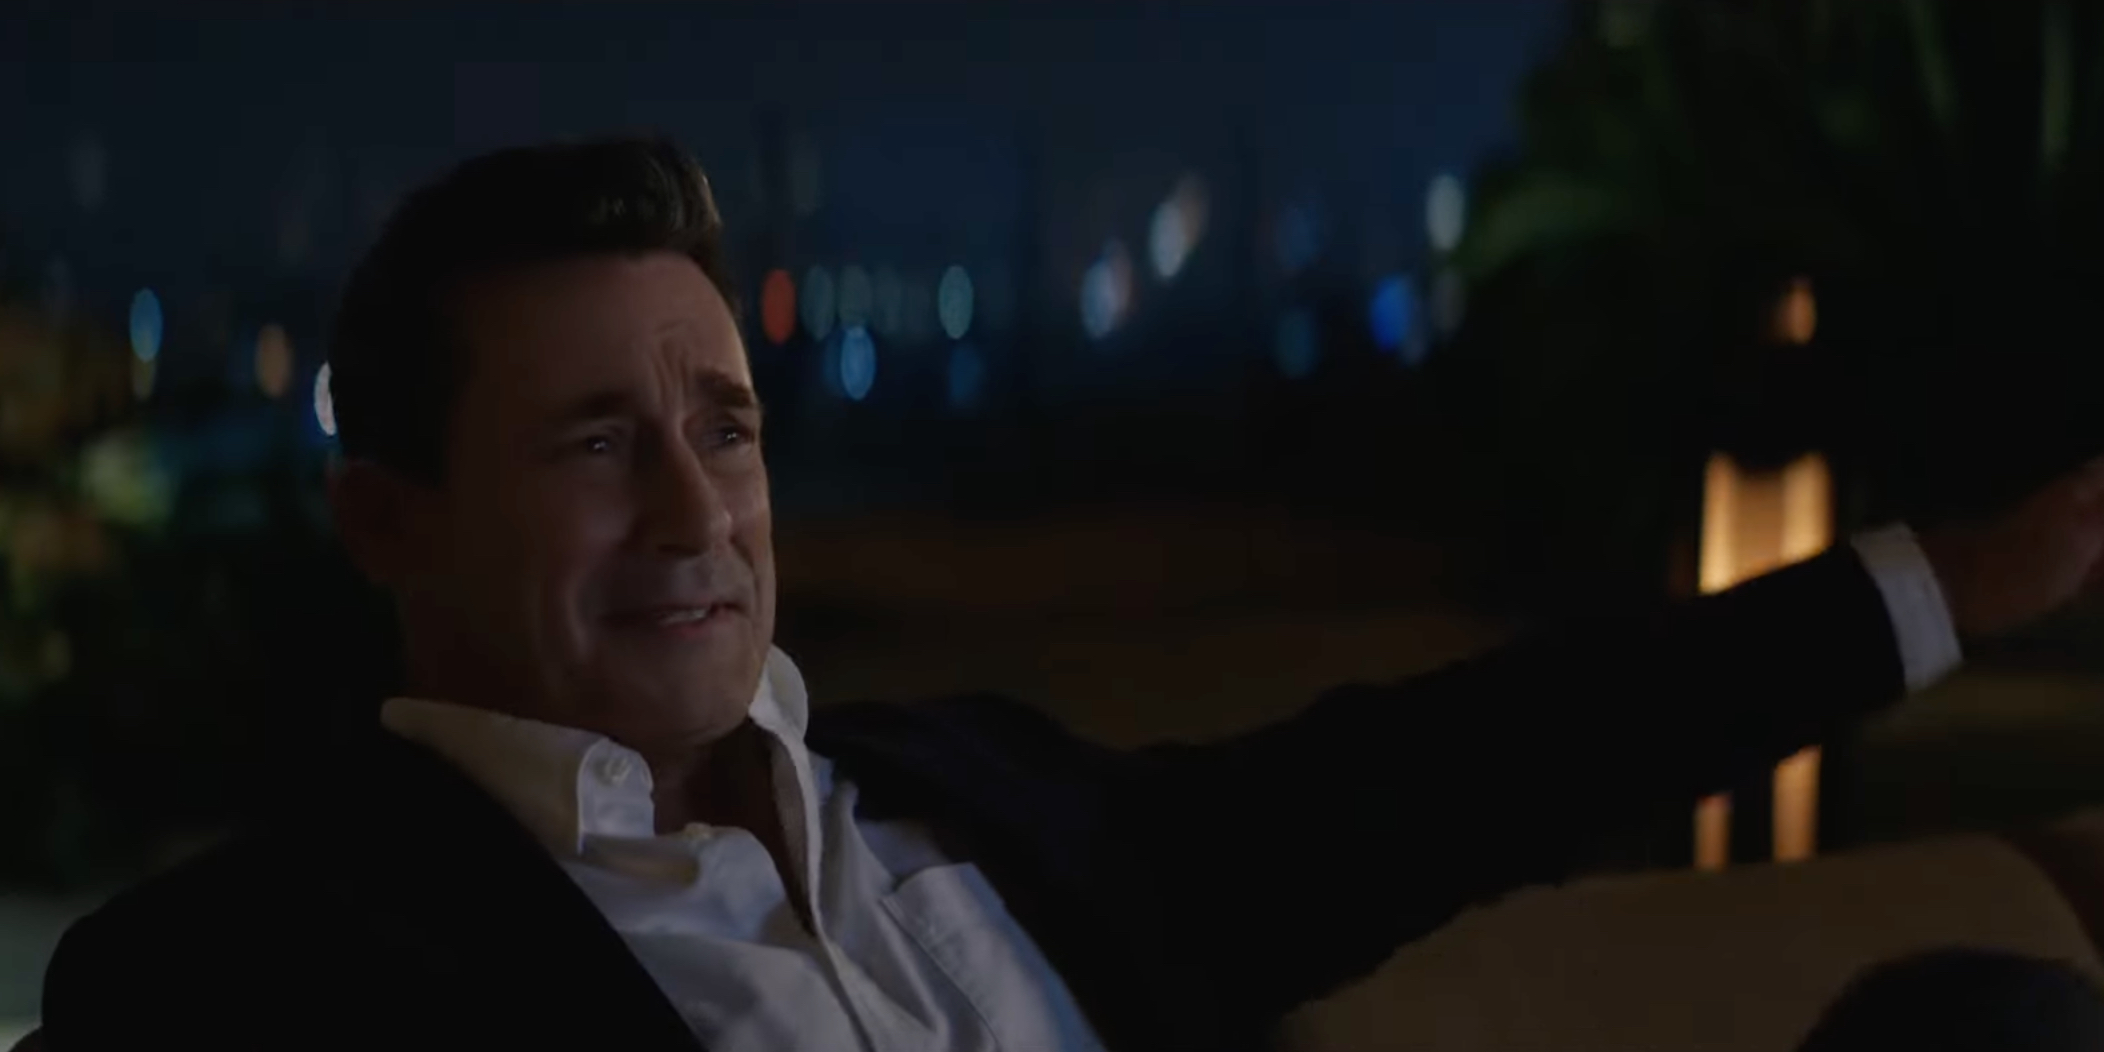 Apple airing new TV ad for Apple TV+ featuring everyone but Jon Hamm